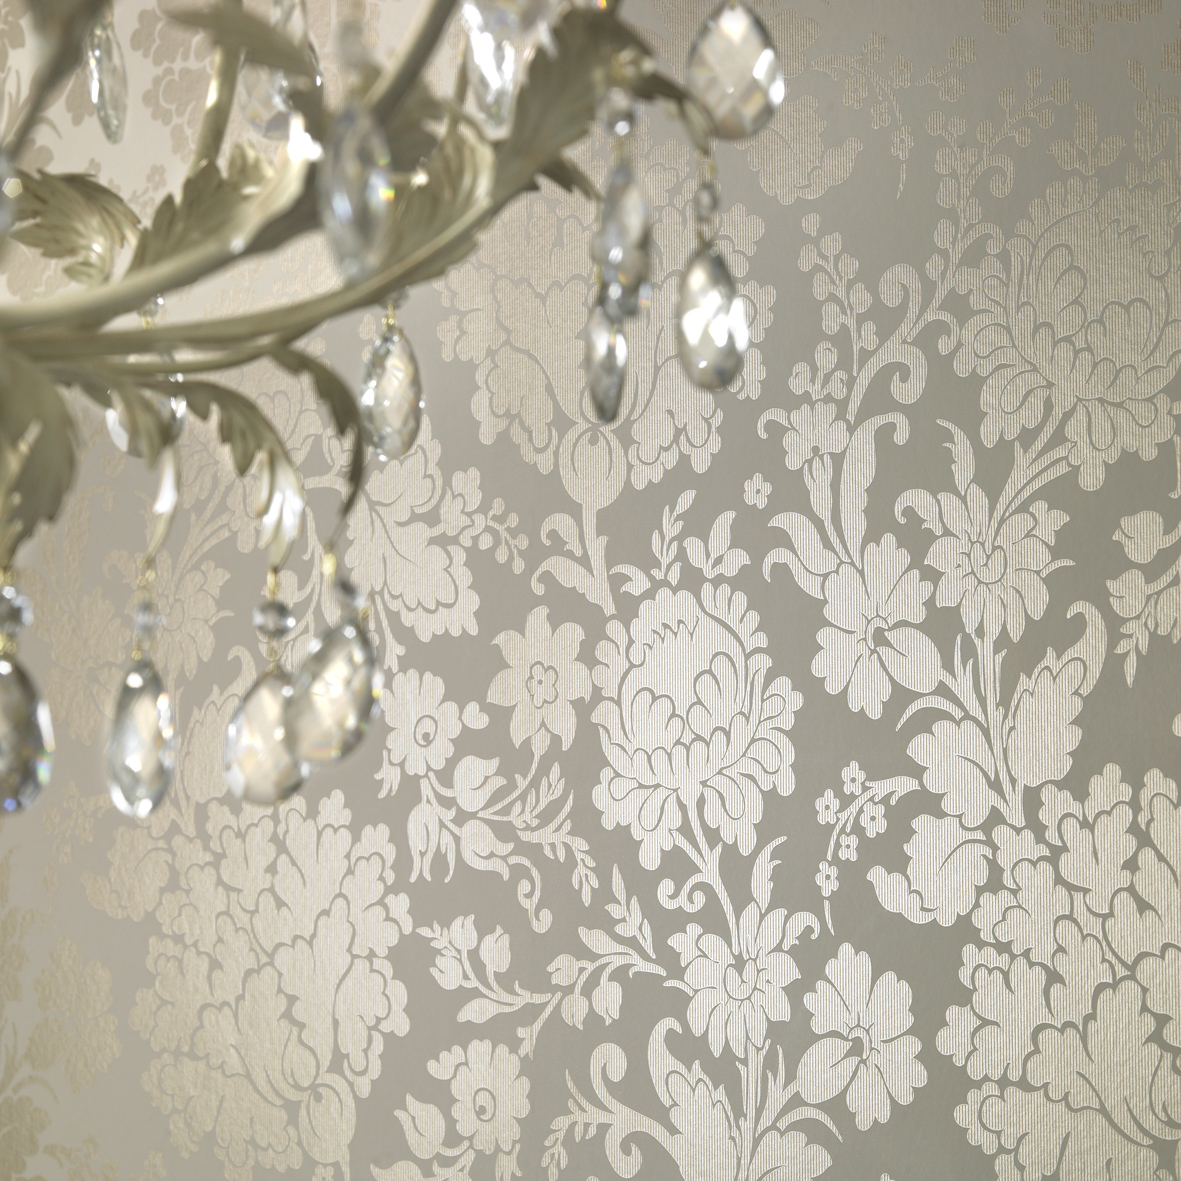 Graham & Brown Launches its New MODE Wallpaper Collection - Romance with a  Contemporary Edge